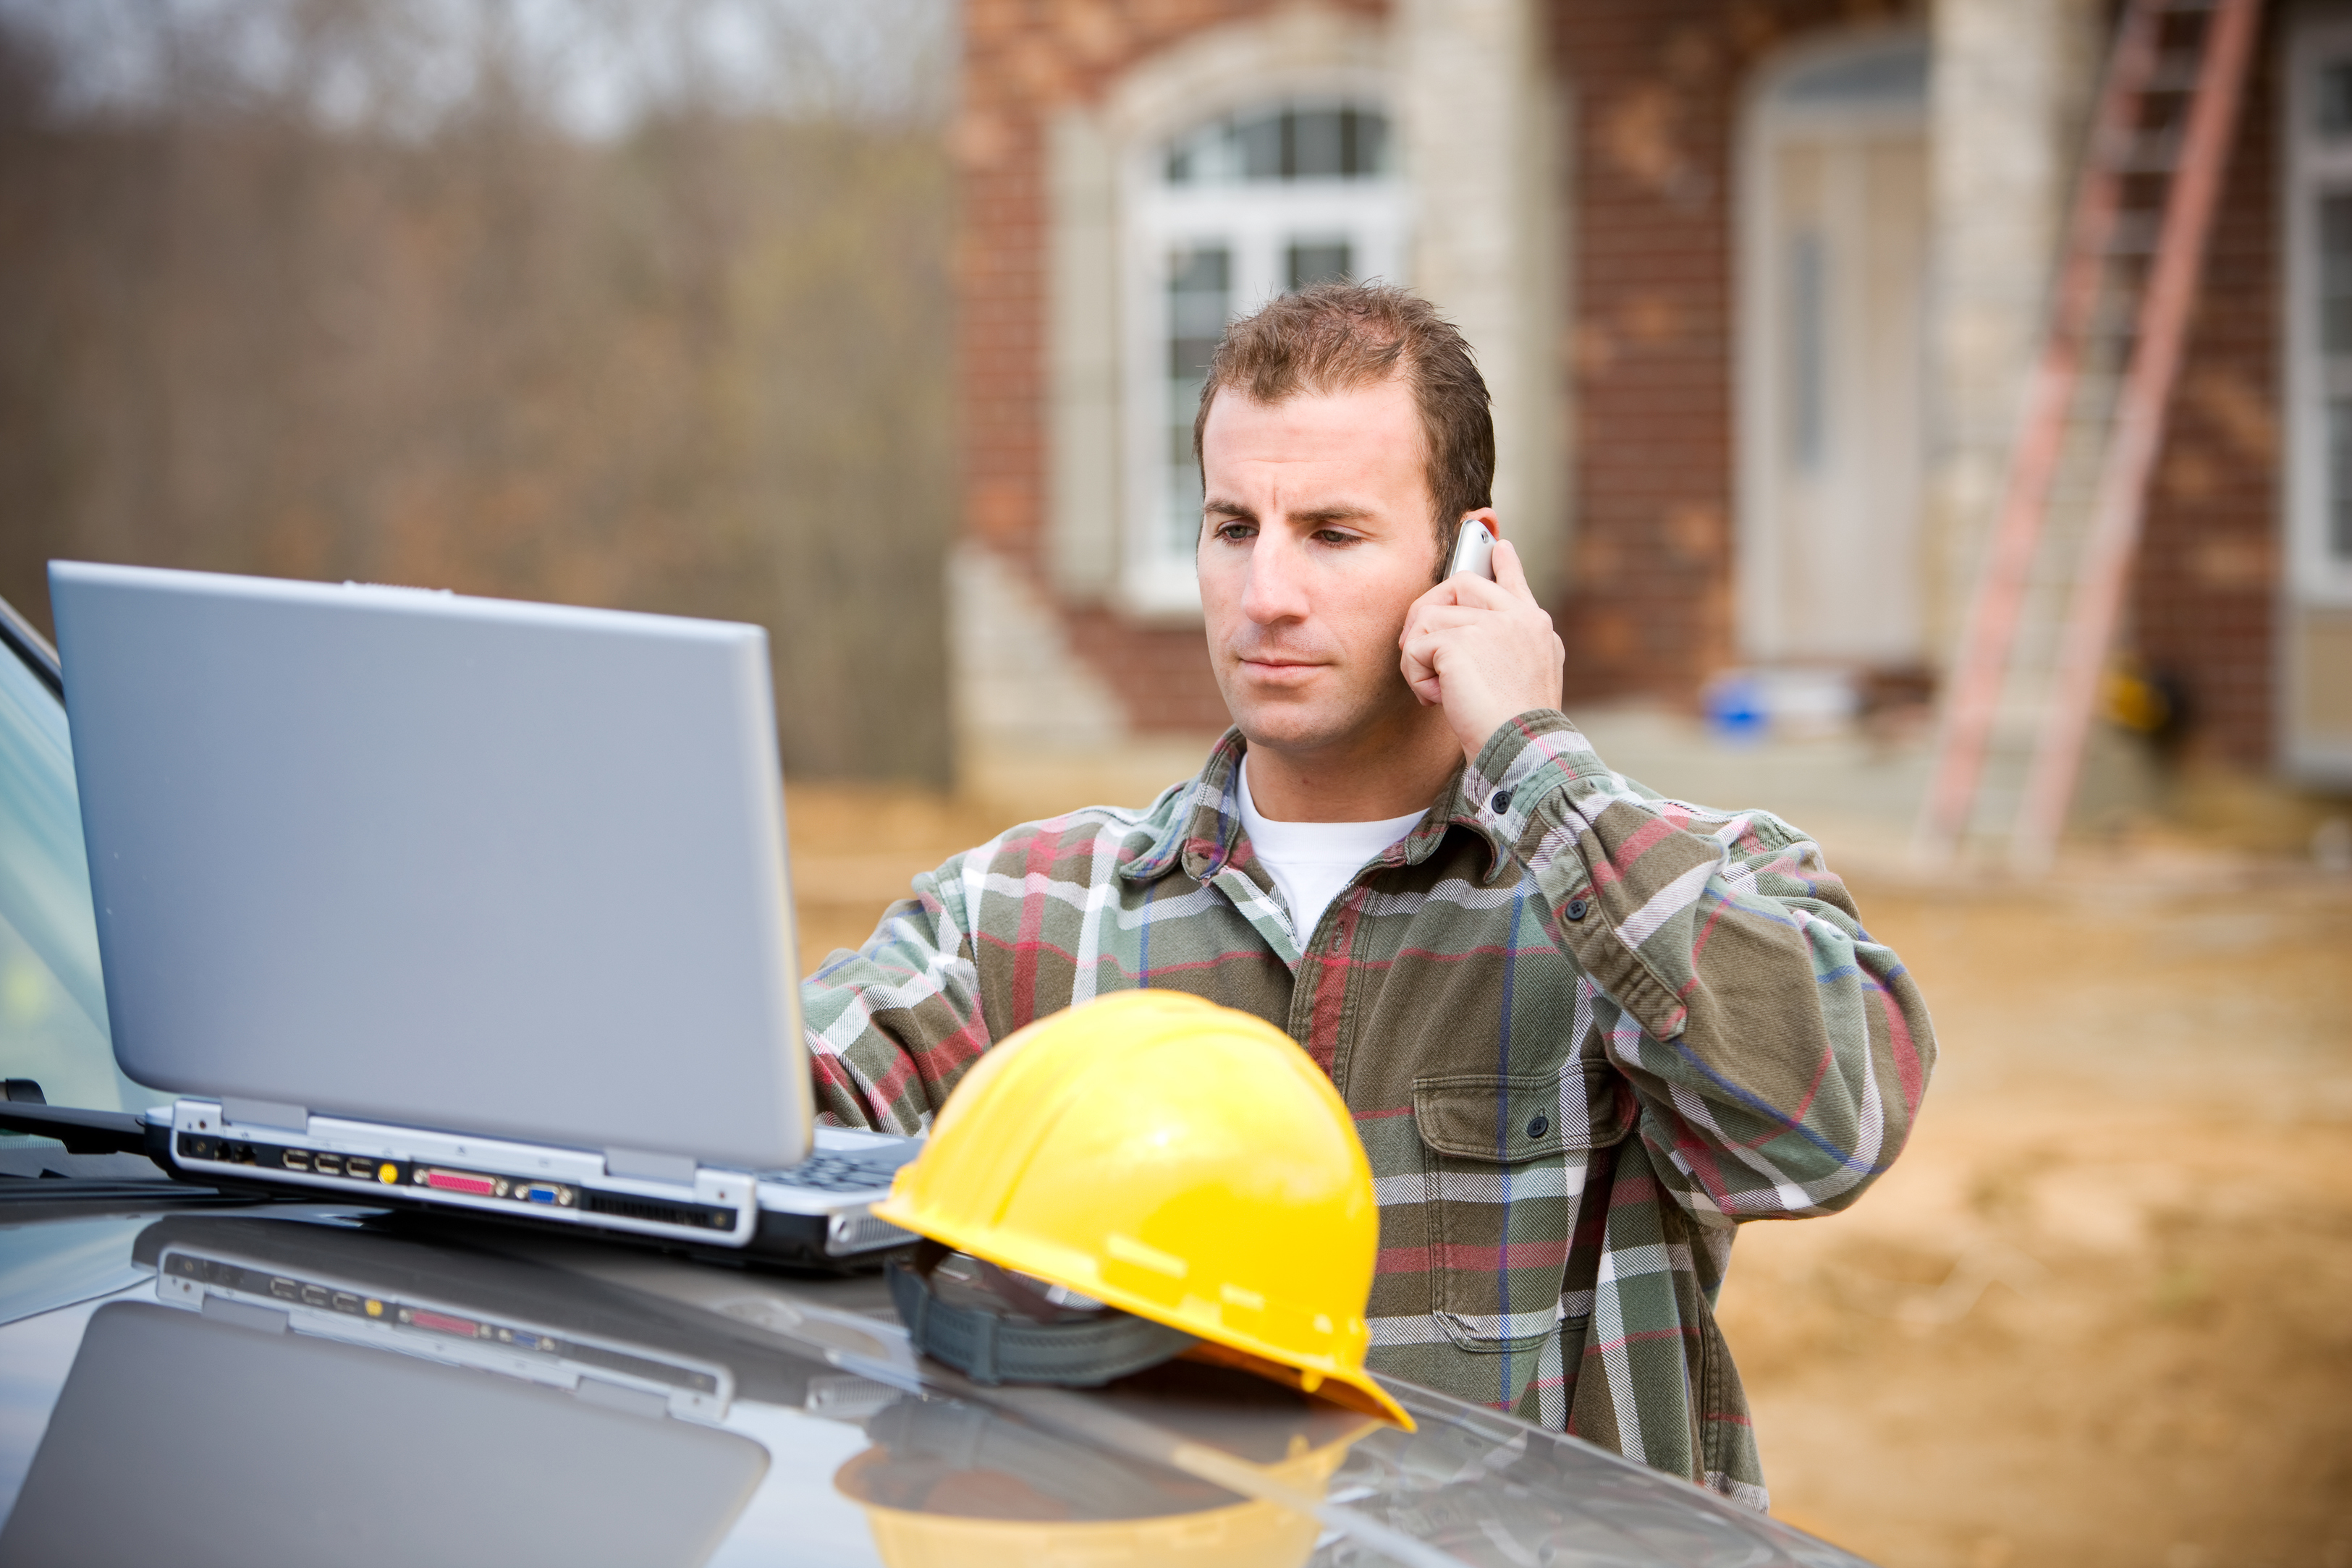 Contractor answering service